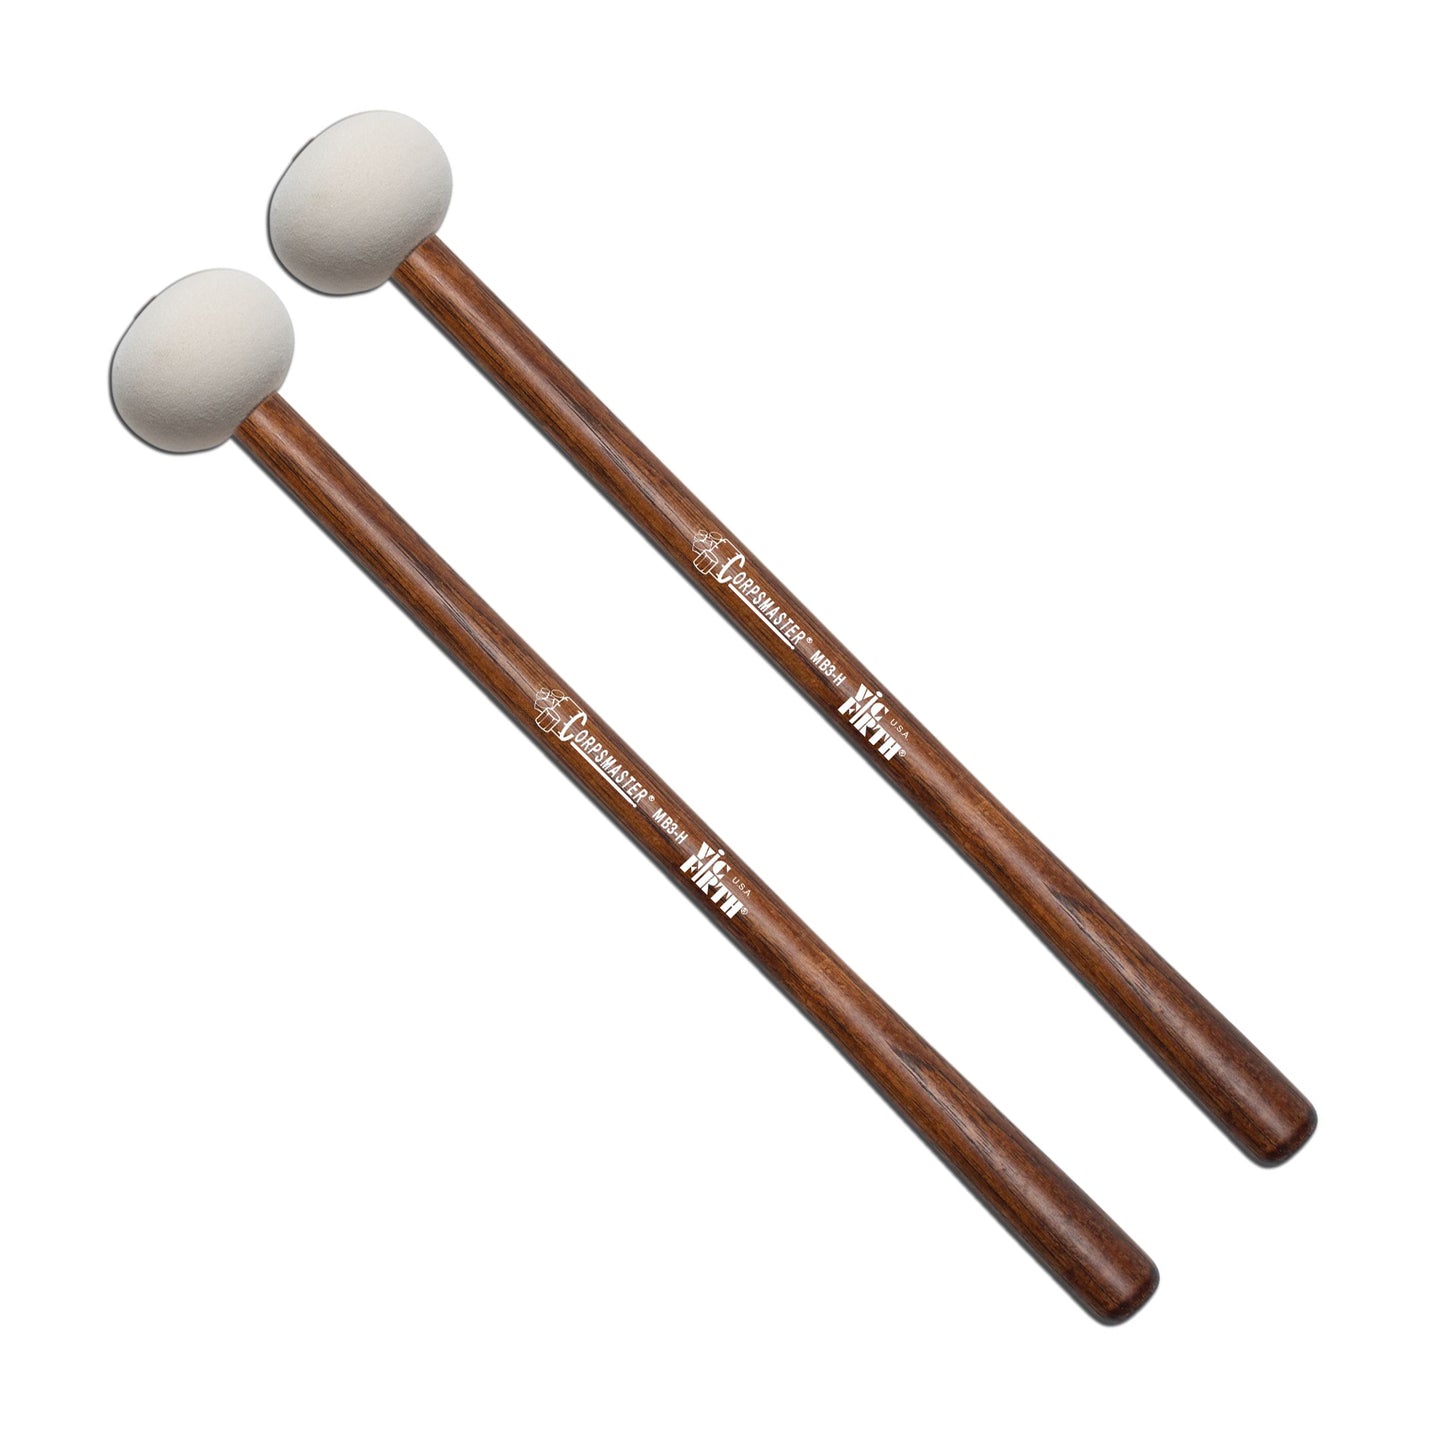 MB3H - Corpsmaster Marching Bass - Large Head, Hard Mallets